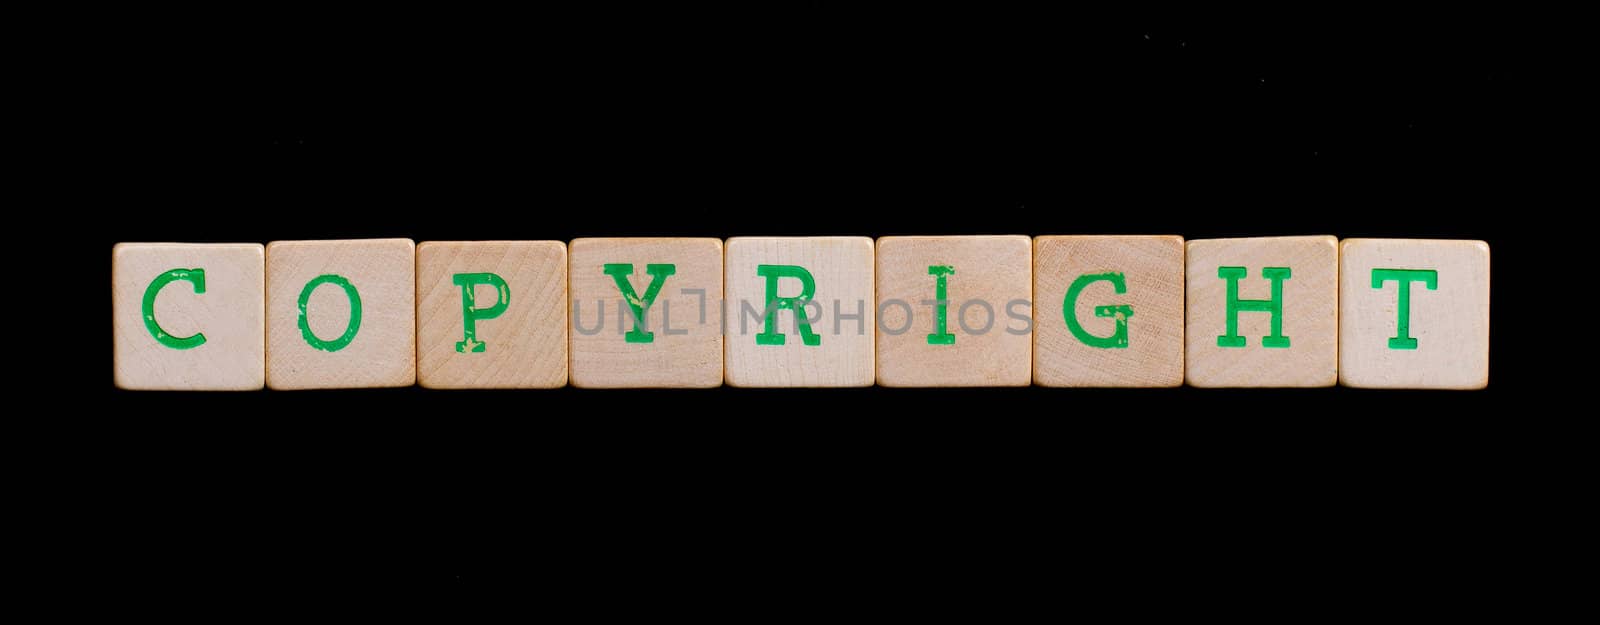 Green letters on old wooden blocks (copyright) by michaklootwijk